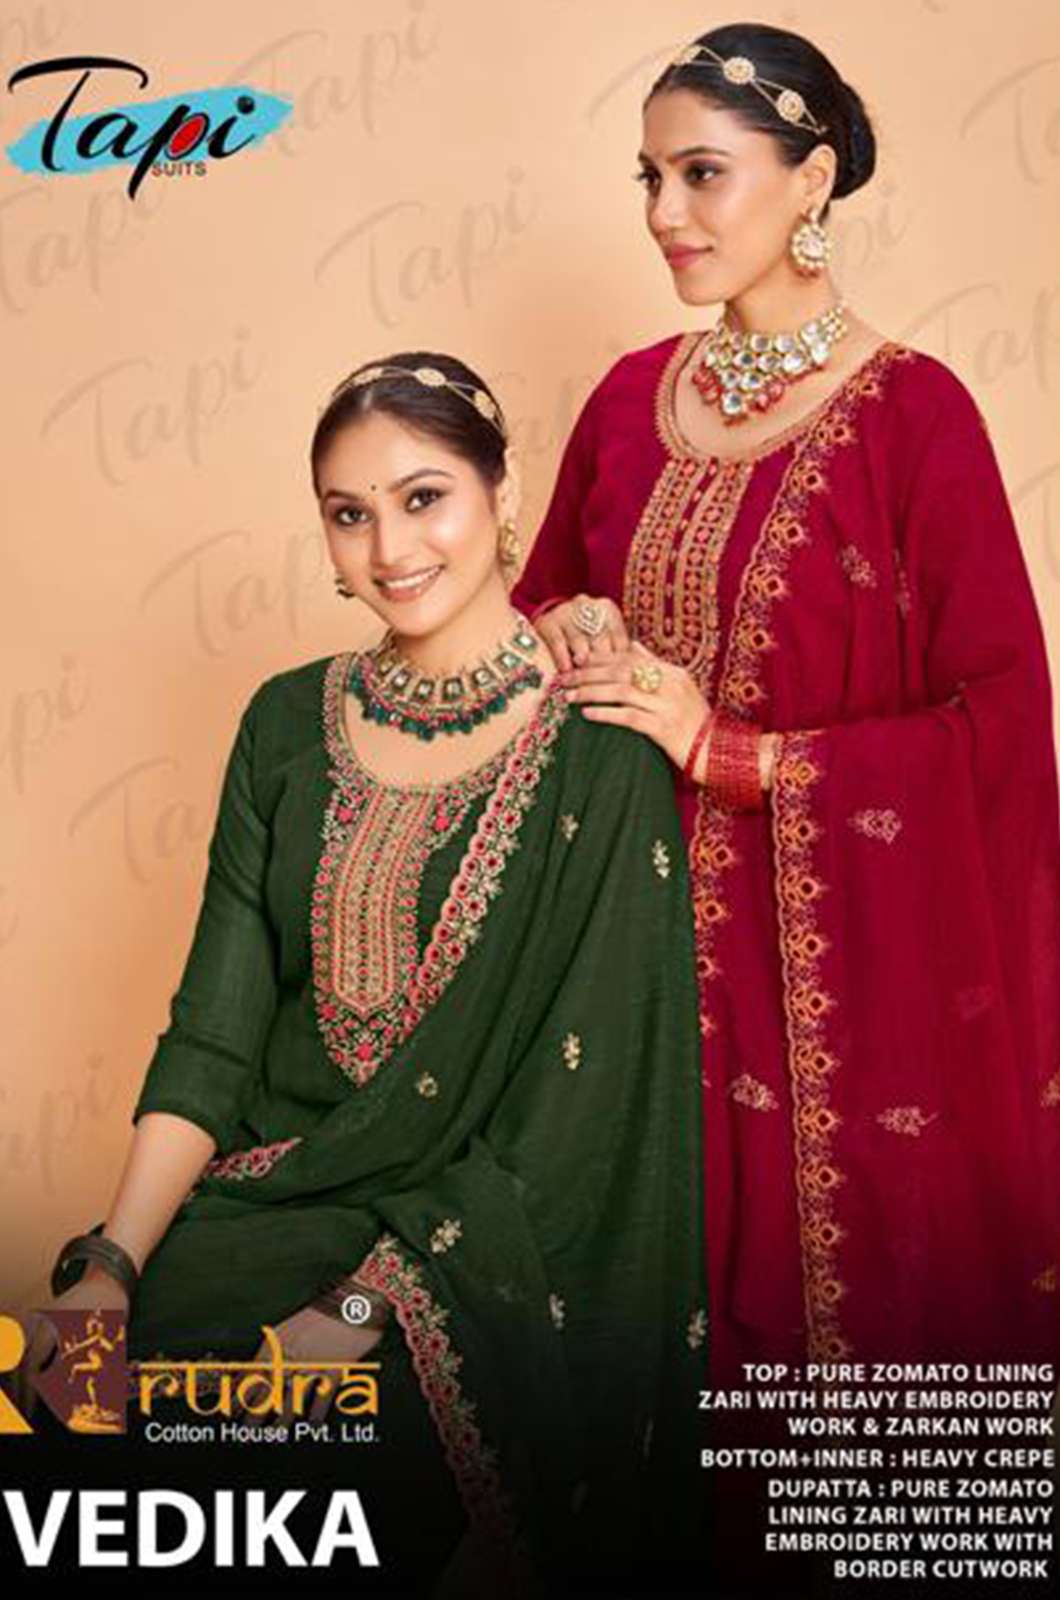 TAPI VEDIKA PURE JAAM LINING ZARI SUIT WITH HEAVY EMBROIDERY WORK 